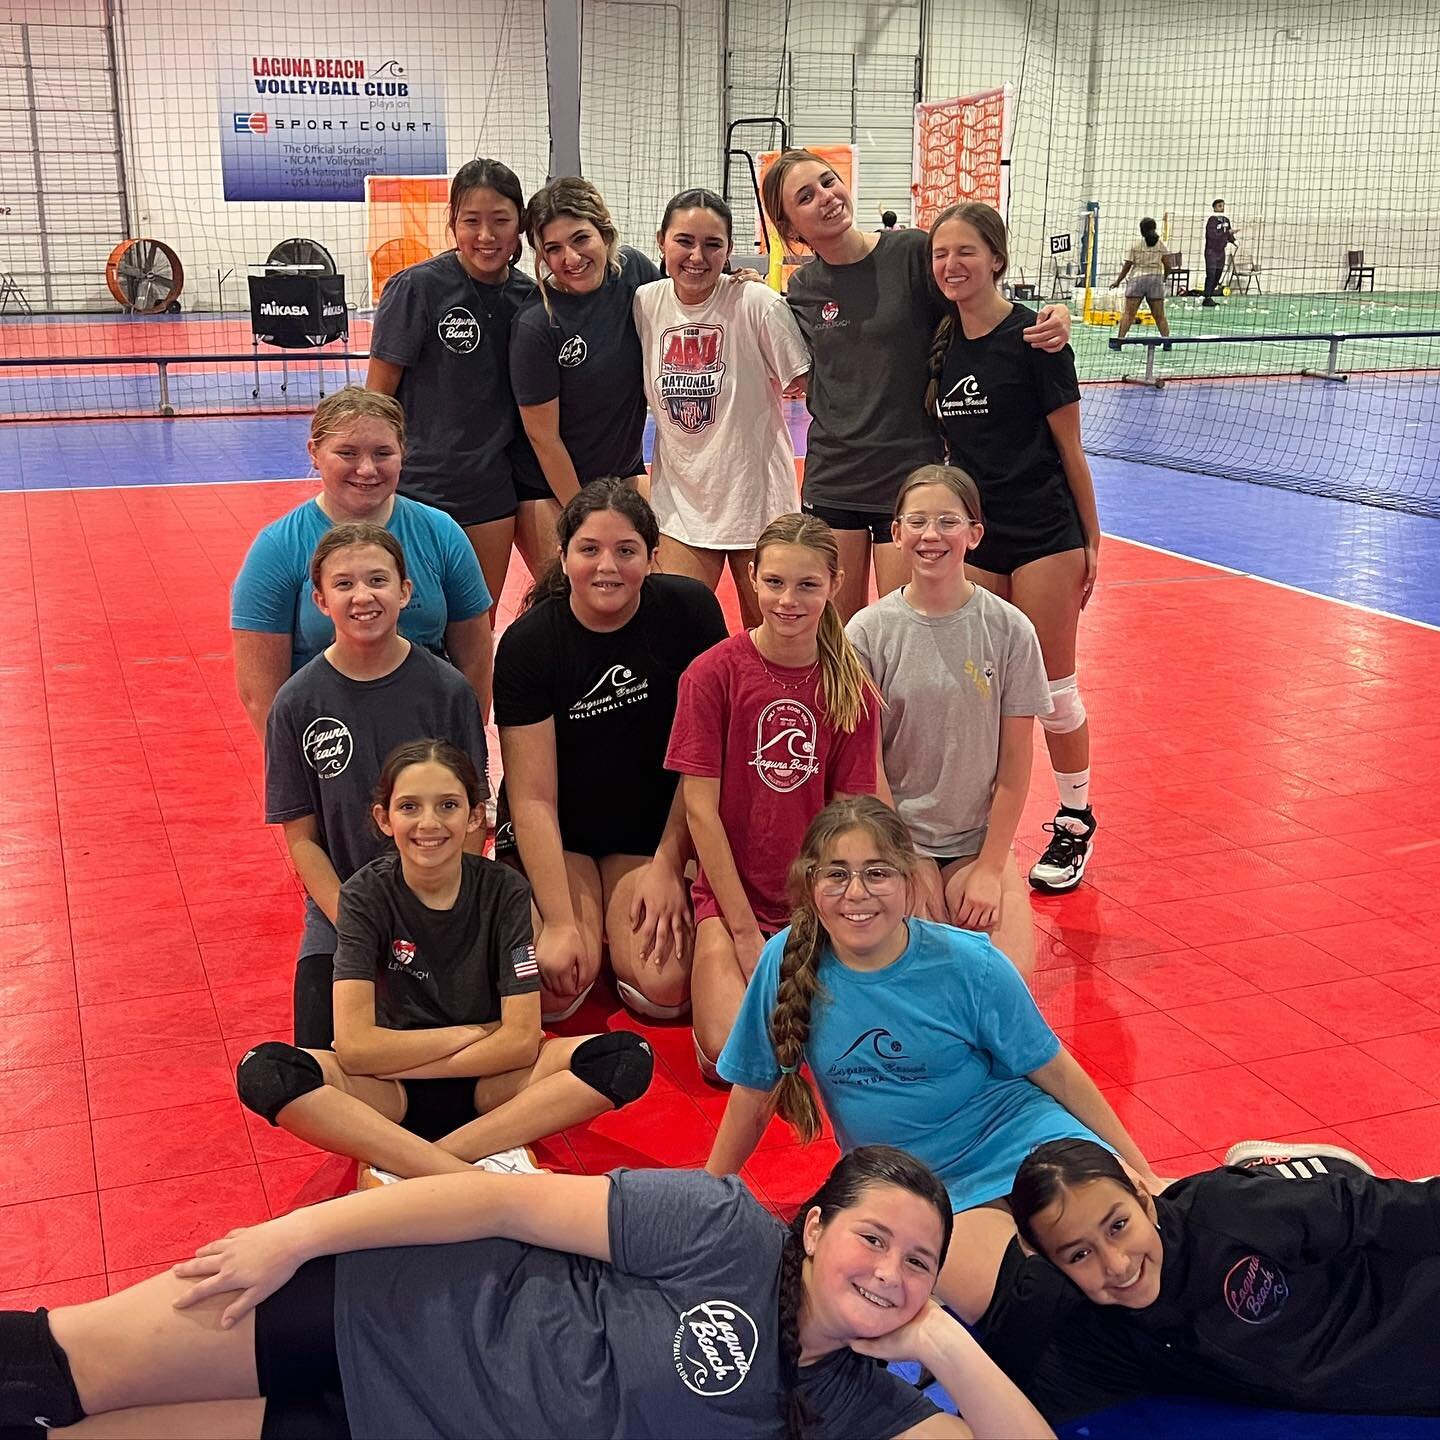 Good luck to 12Kyra at their tournament  on Saturday! Many thanks to Coach Kyra&rsquo;s past players for helping them get ready for this weekend! Go Laguna! 🏐 #lbvbc #lbvbcalum #lbvbcfamily #lagunavolleyball